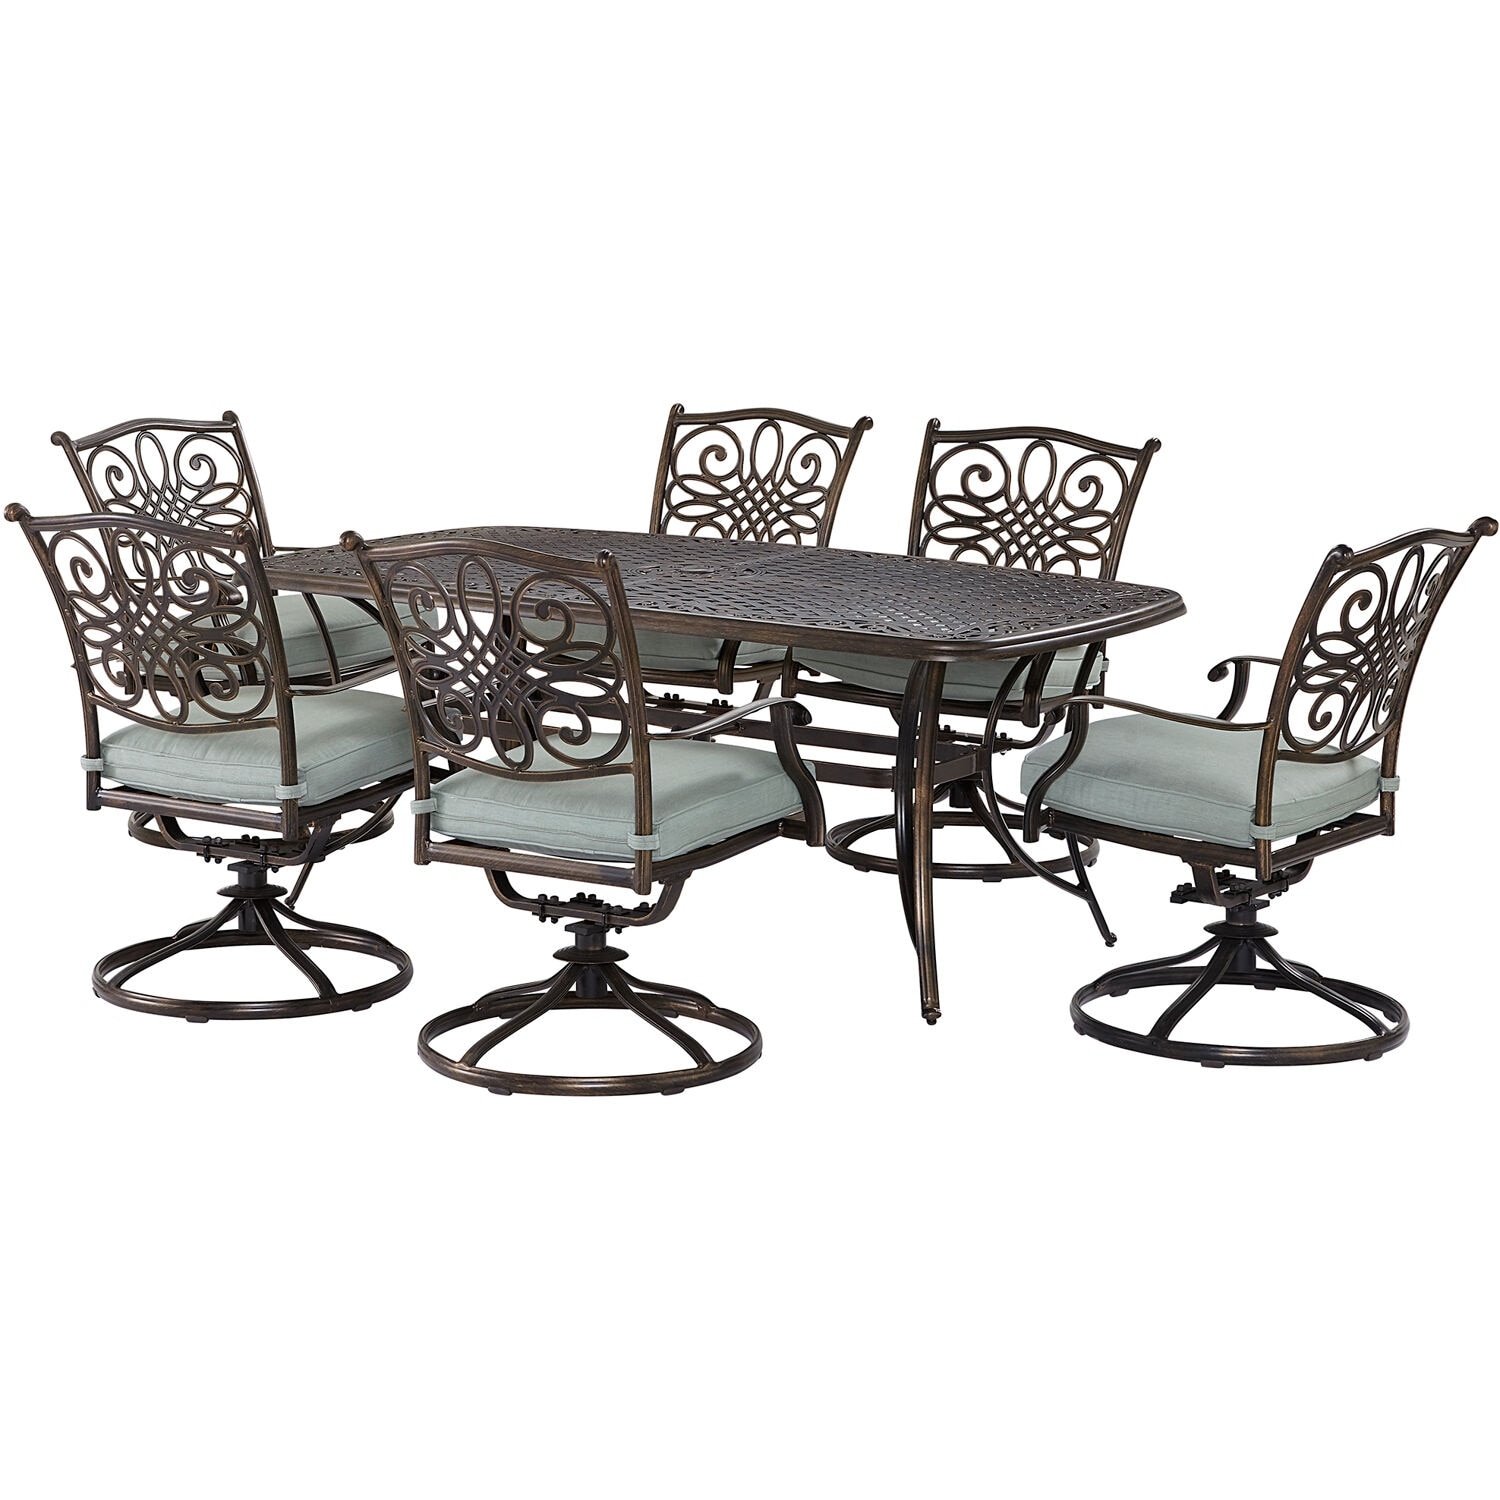 Agio Renditions 7-piece Set With 6 Swivel Rockers And 38-in. X 72-in. Cast-top Table  Featuring Sunbrellaand Fabric In Mist Blue